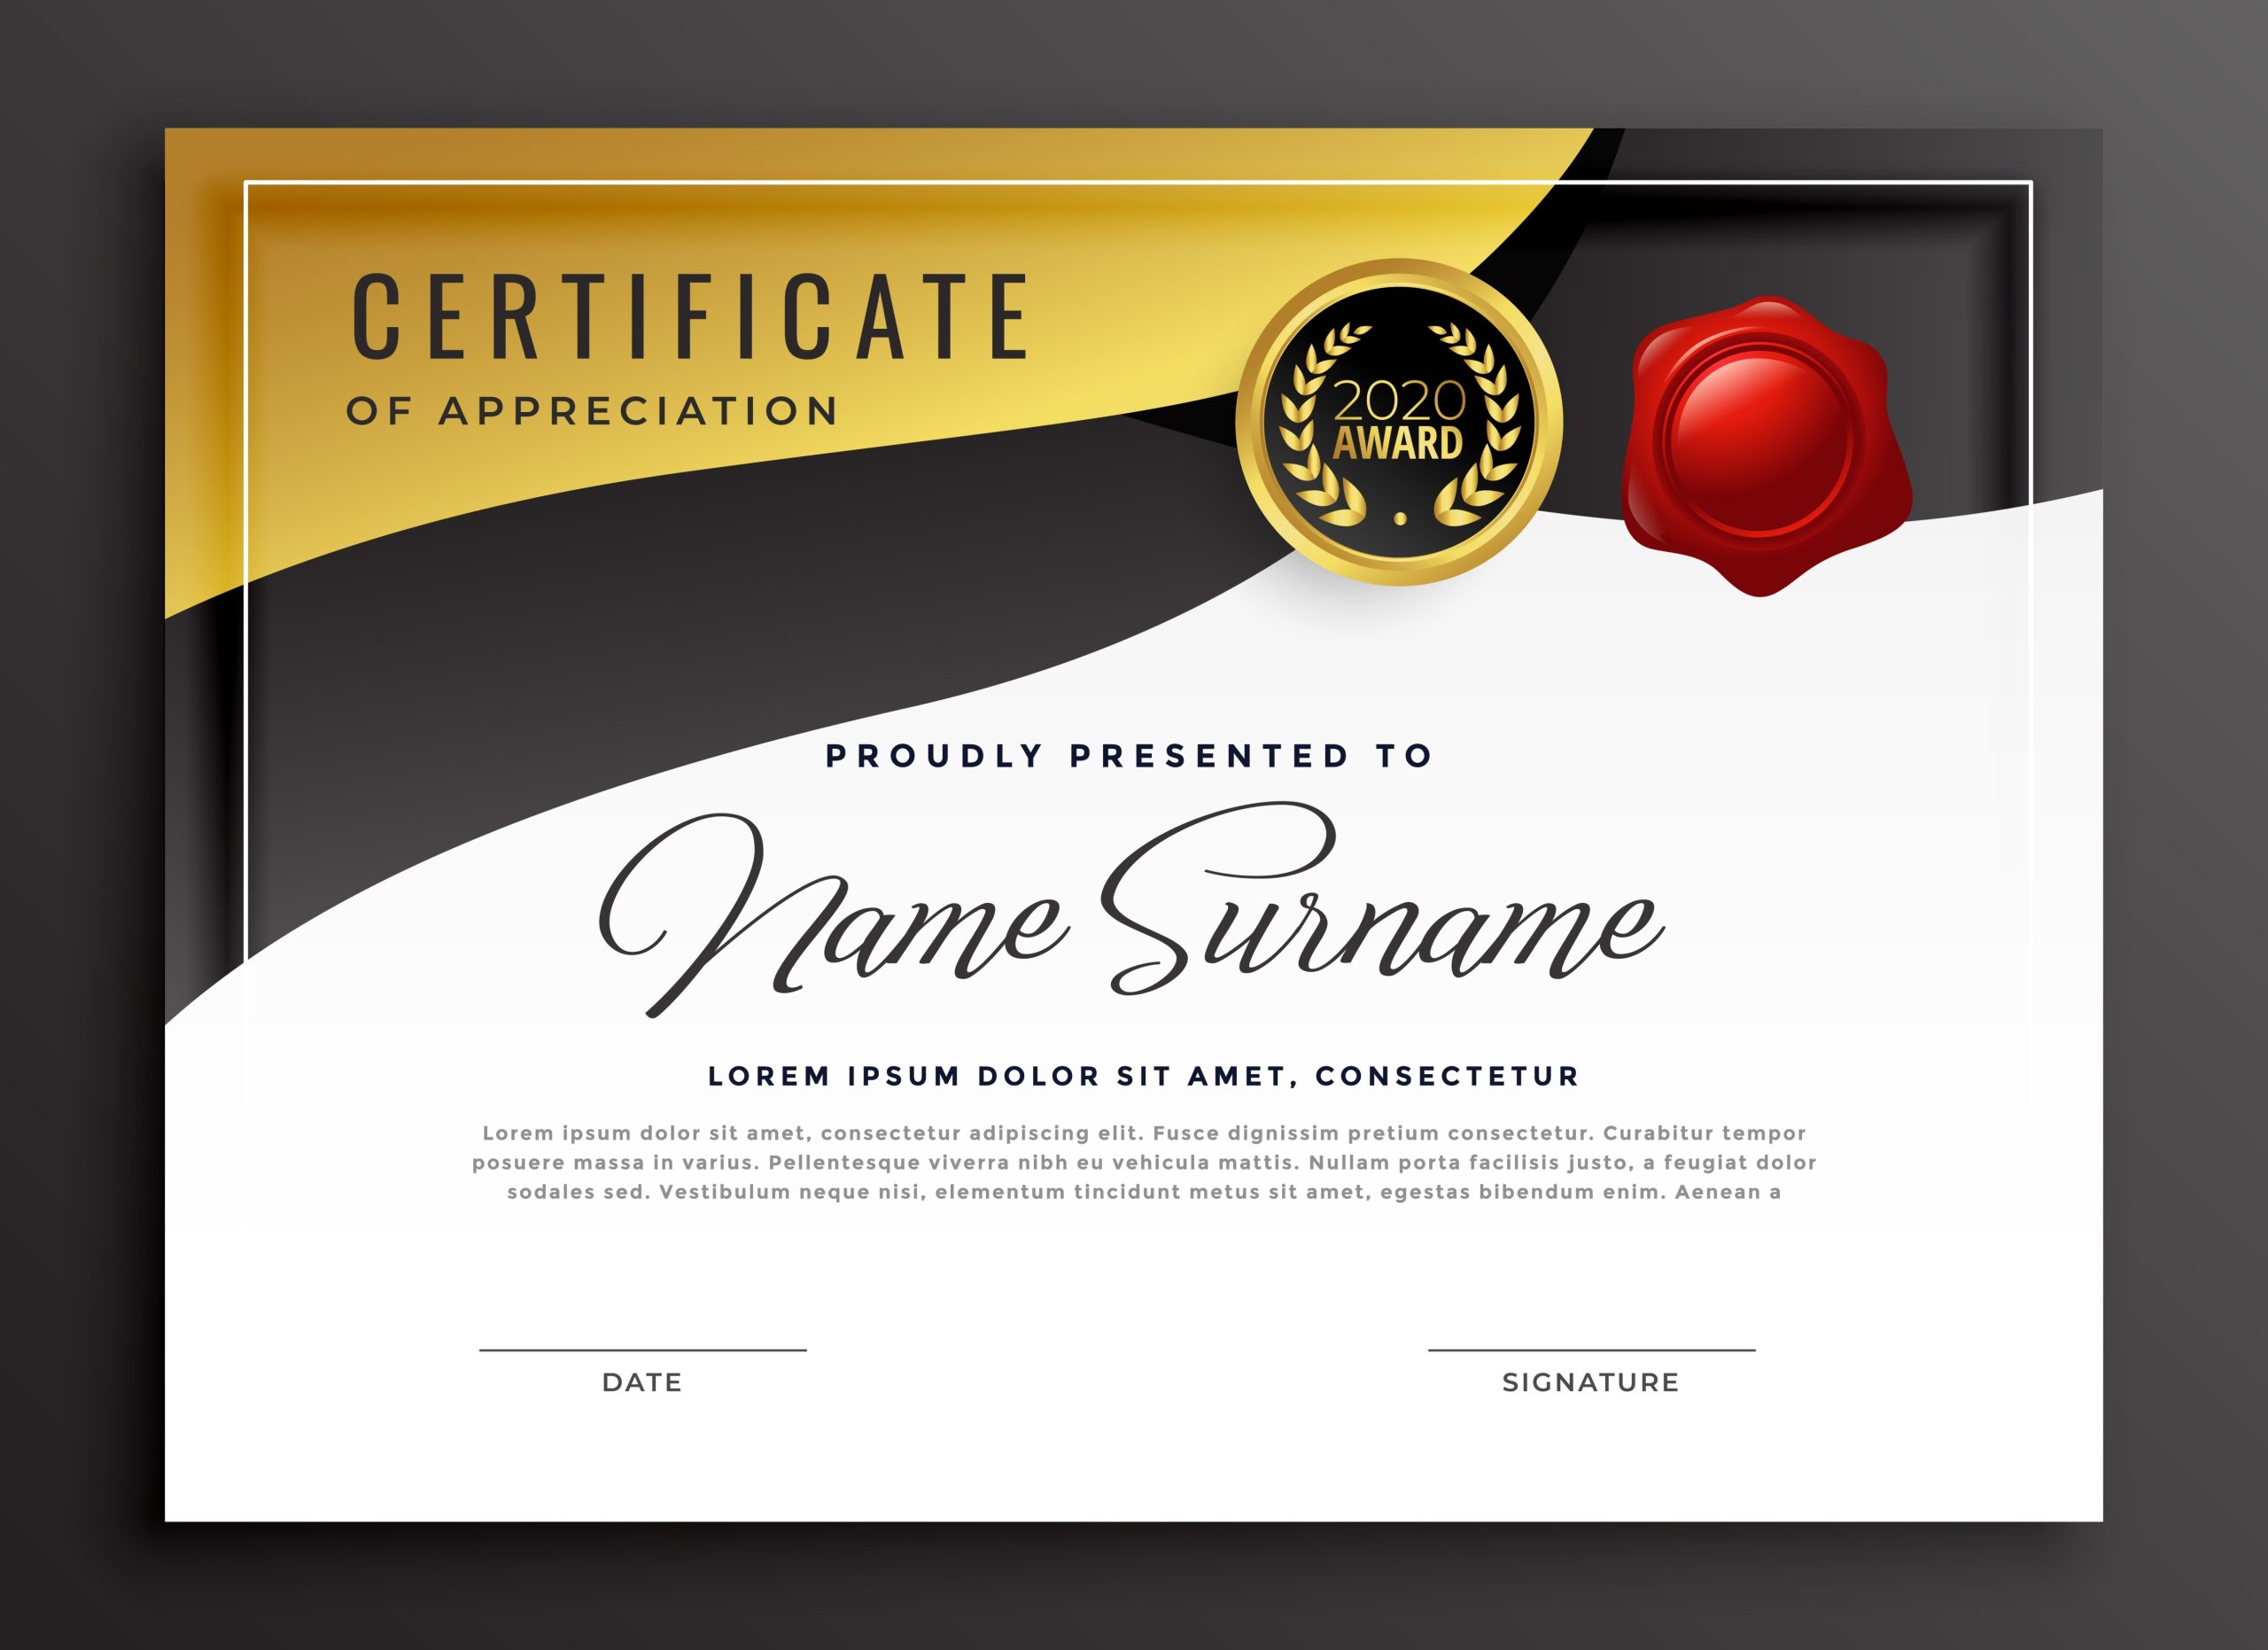 Golden Certificate Of Appreciation Template - Download Free Vector Art For Template For Certificate Of Award